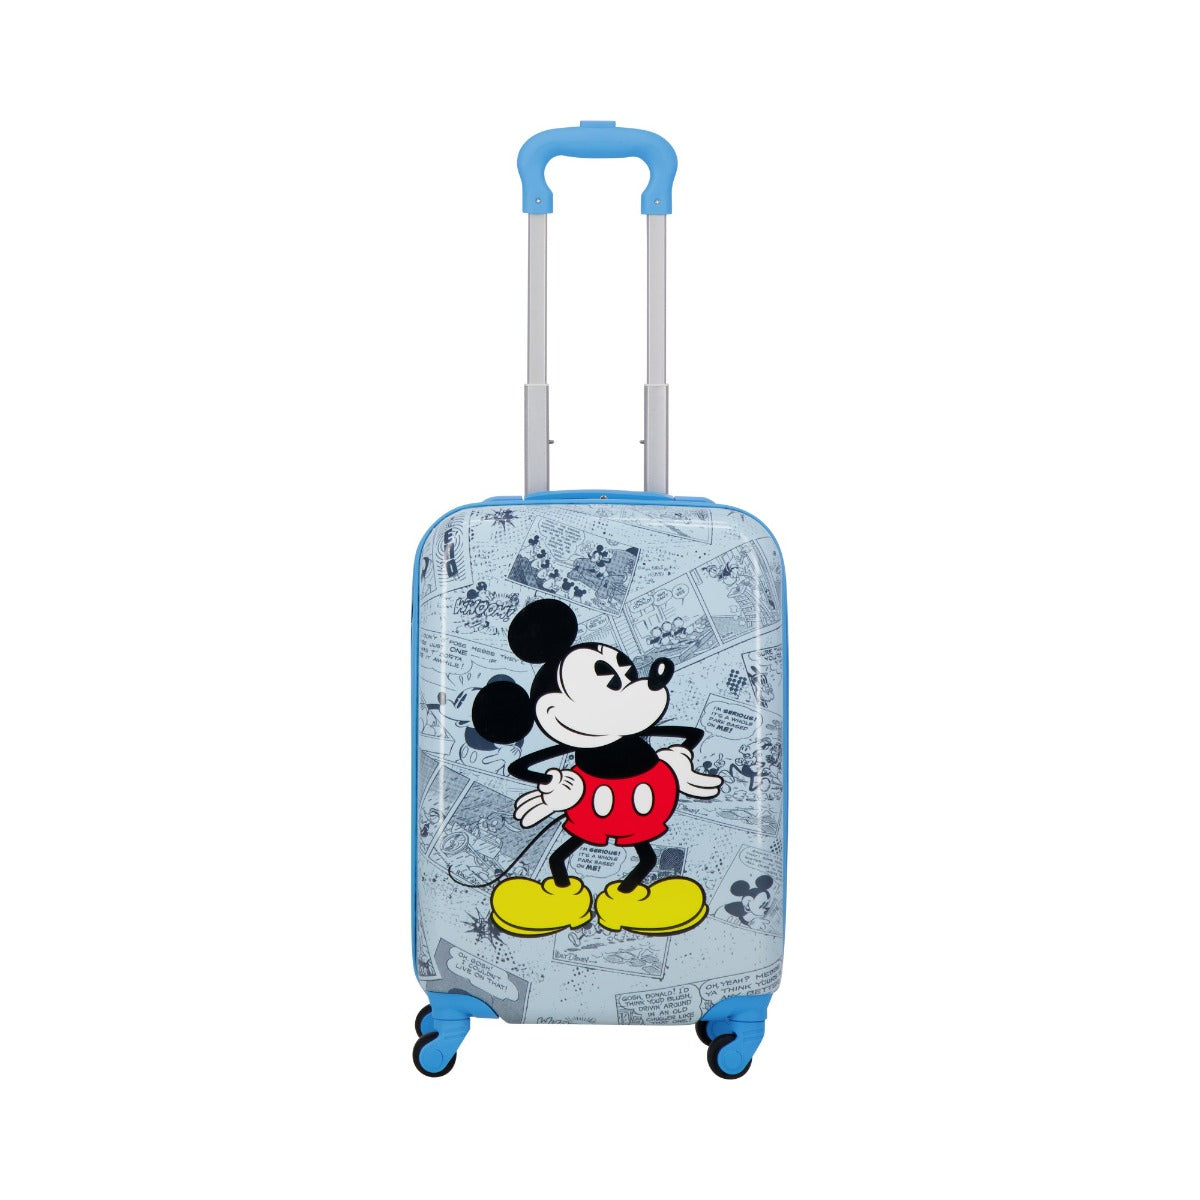 Blue Disney Ful Heritage Mickey Mouse 21" suitcase - best carry-on luggage for kids